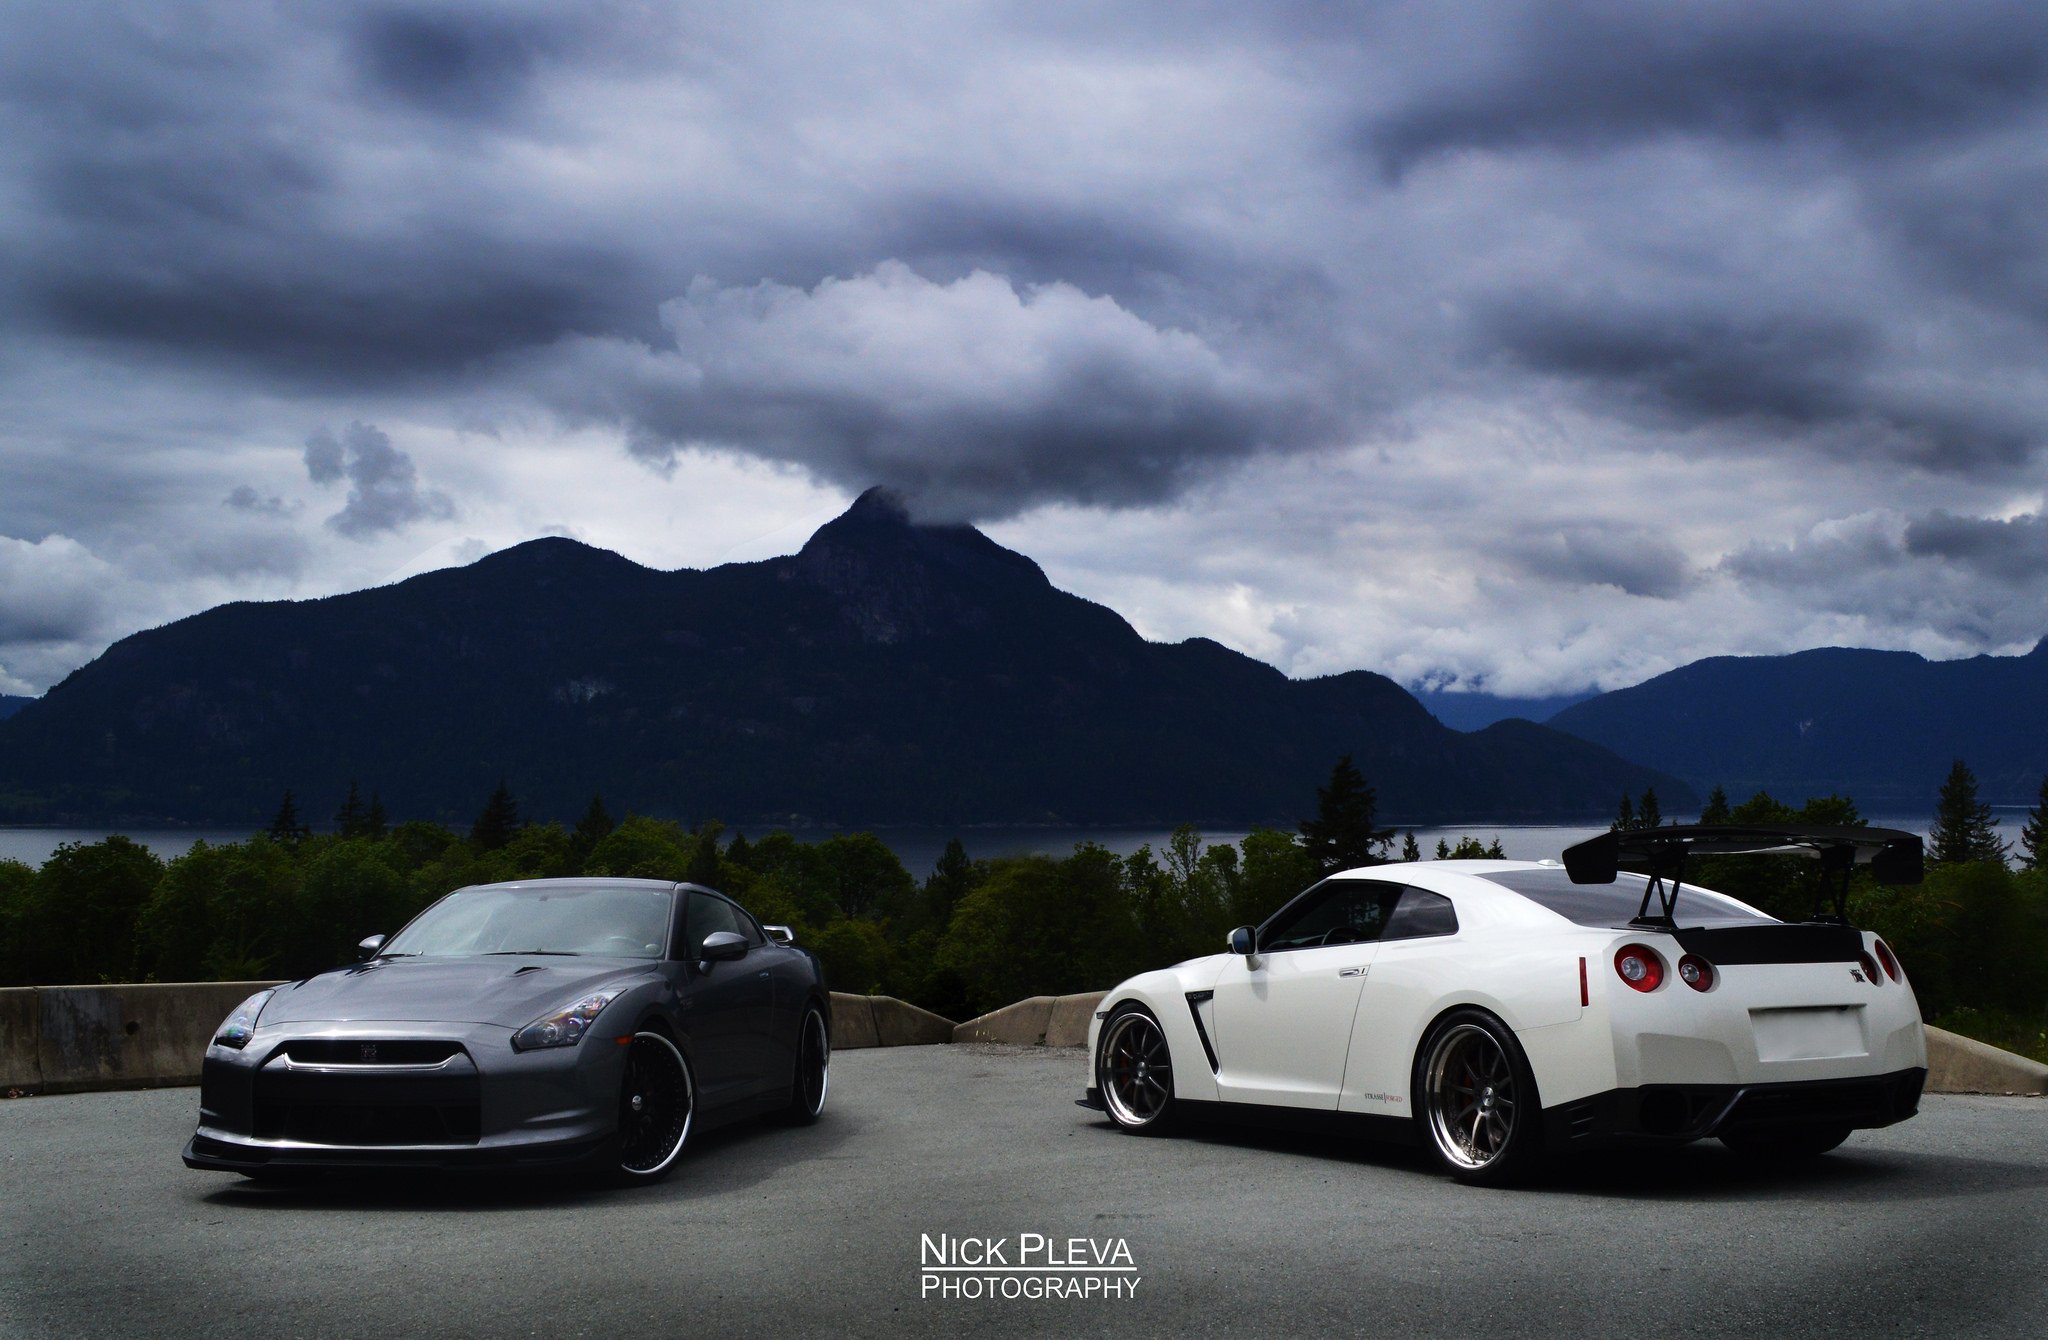 gt r, Nismo, Nissan, R35, Tuning, Supercar, Coupe, Japan, Cars, Blanc, White, Bianco Wallpaper